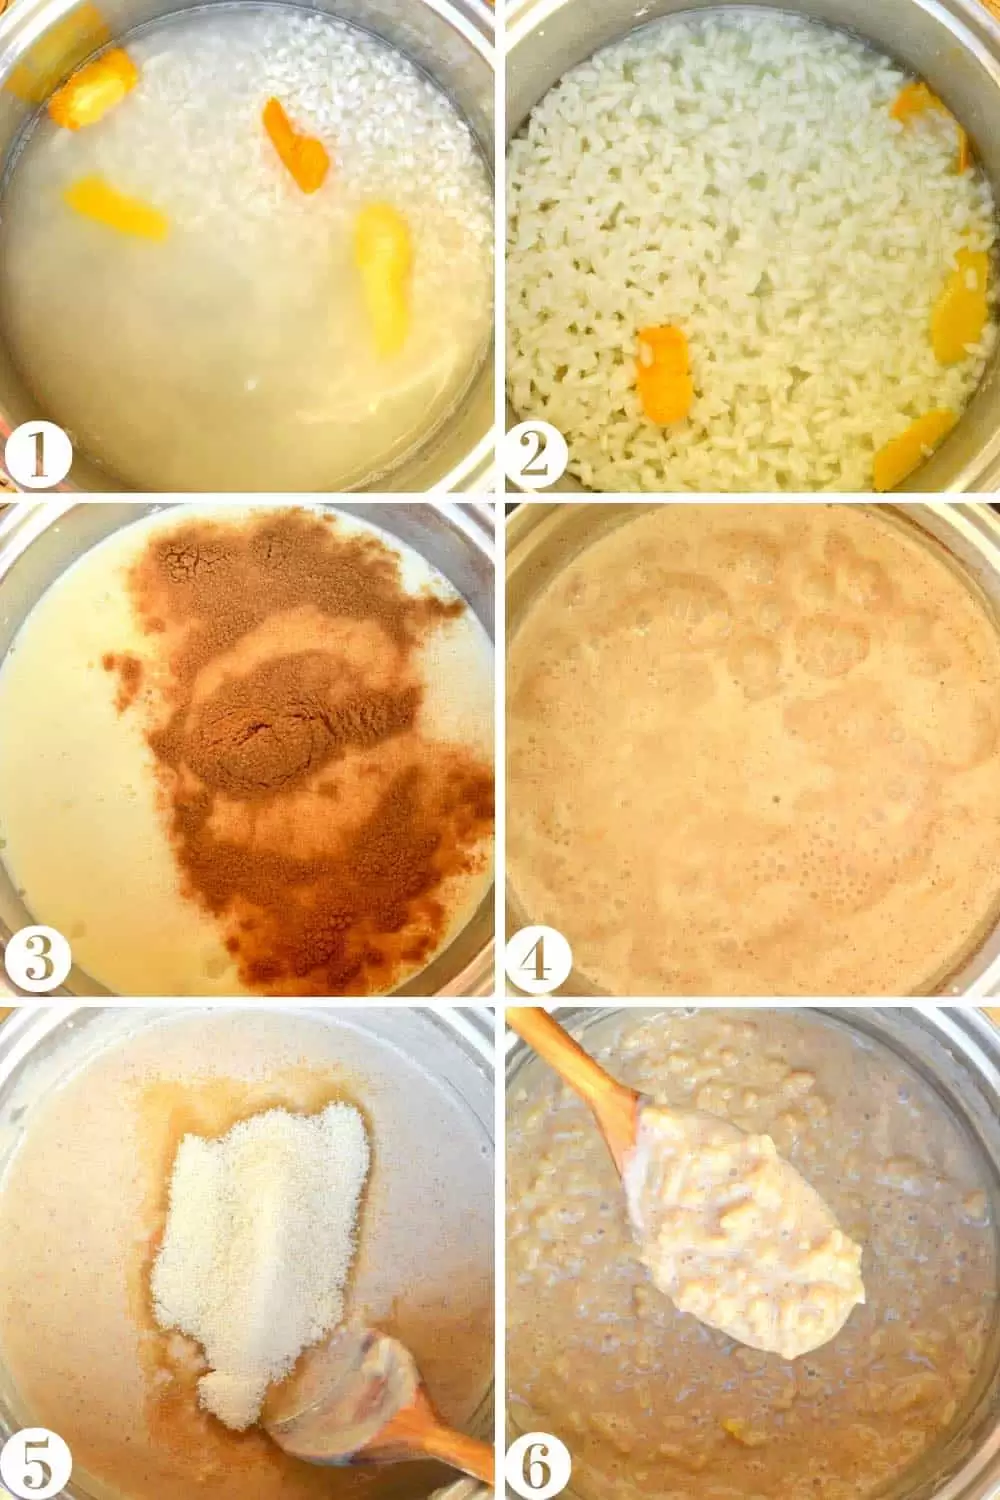 Step by step collage showing the cooking process